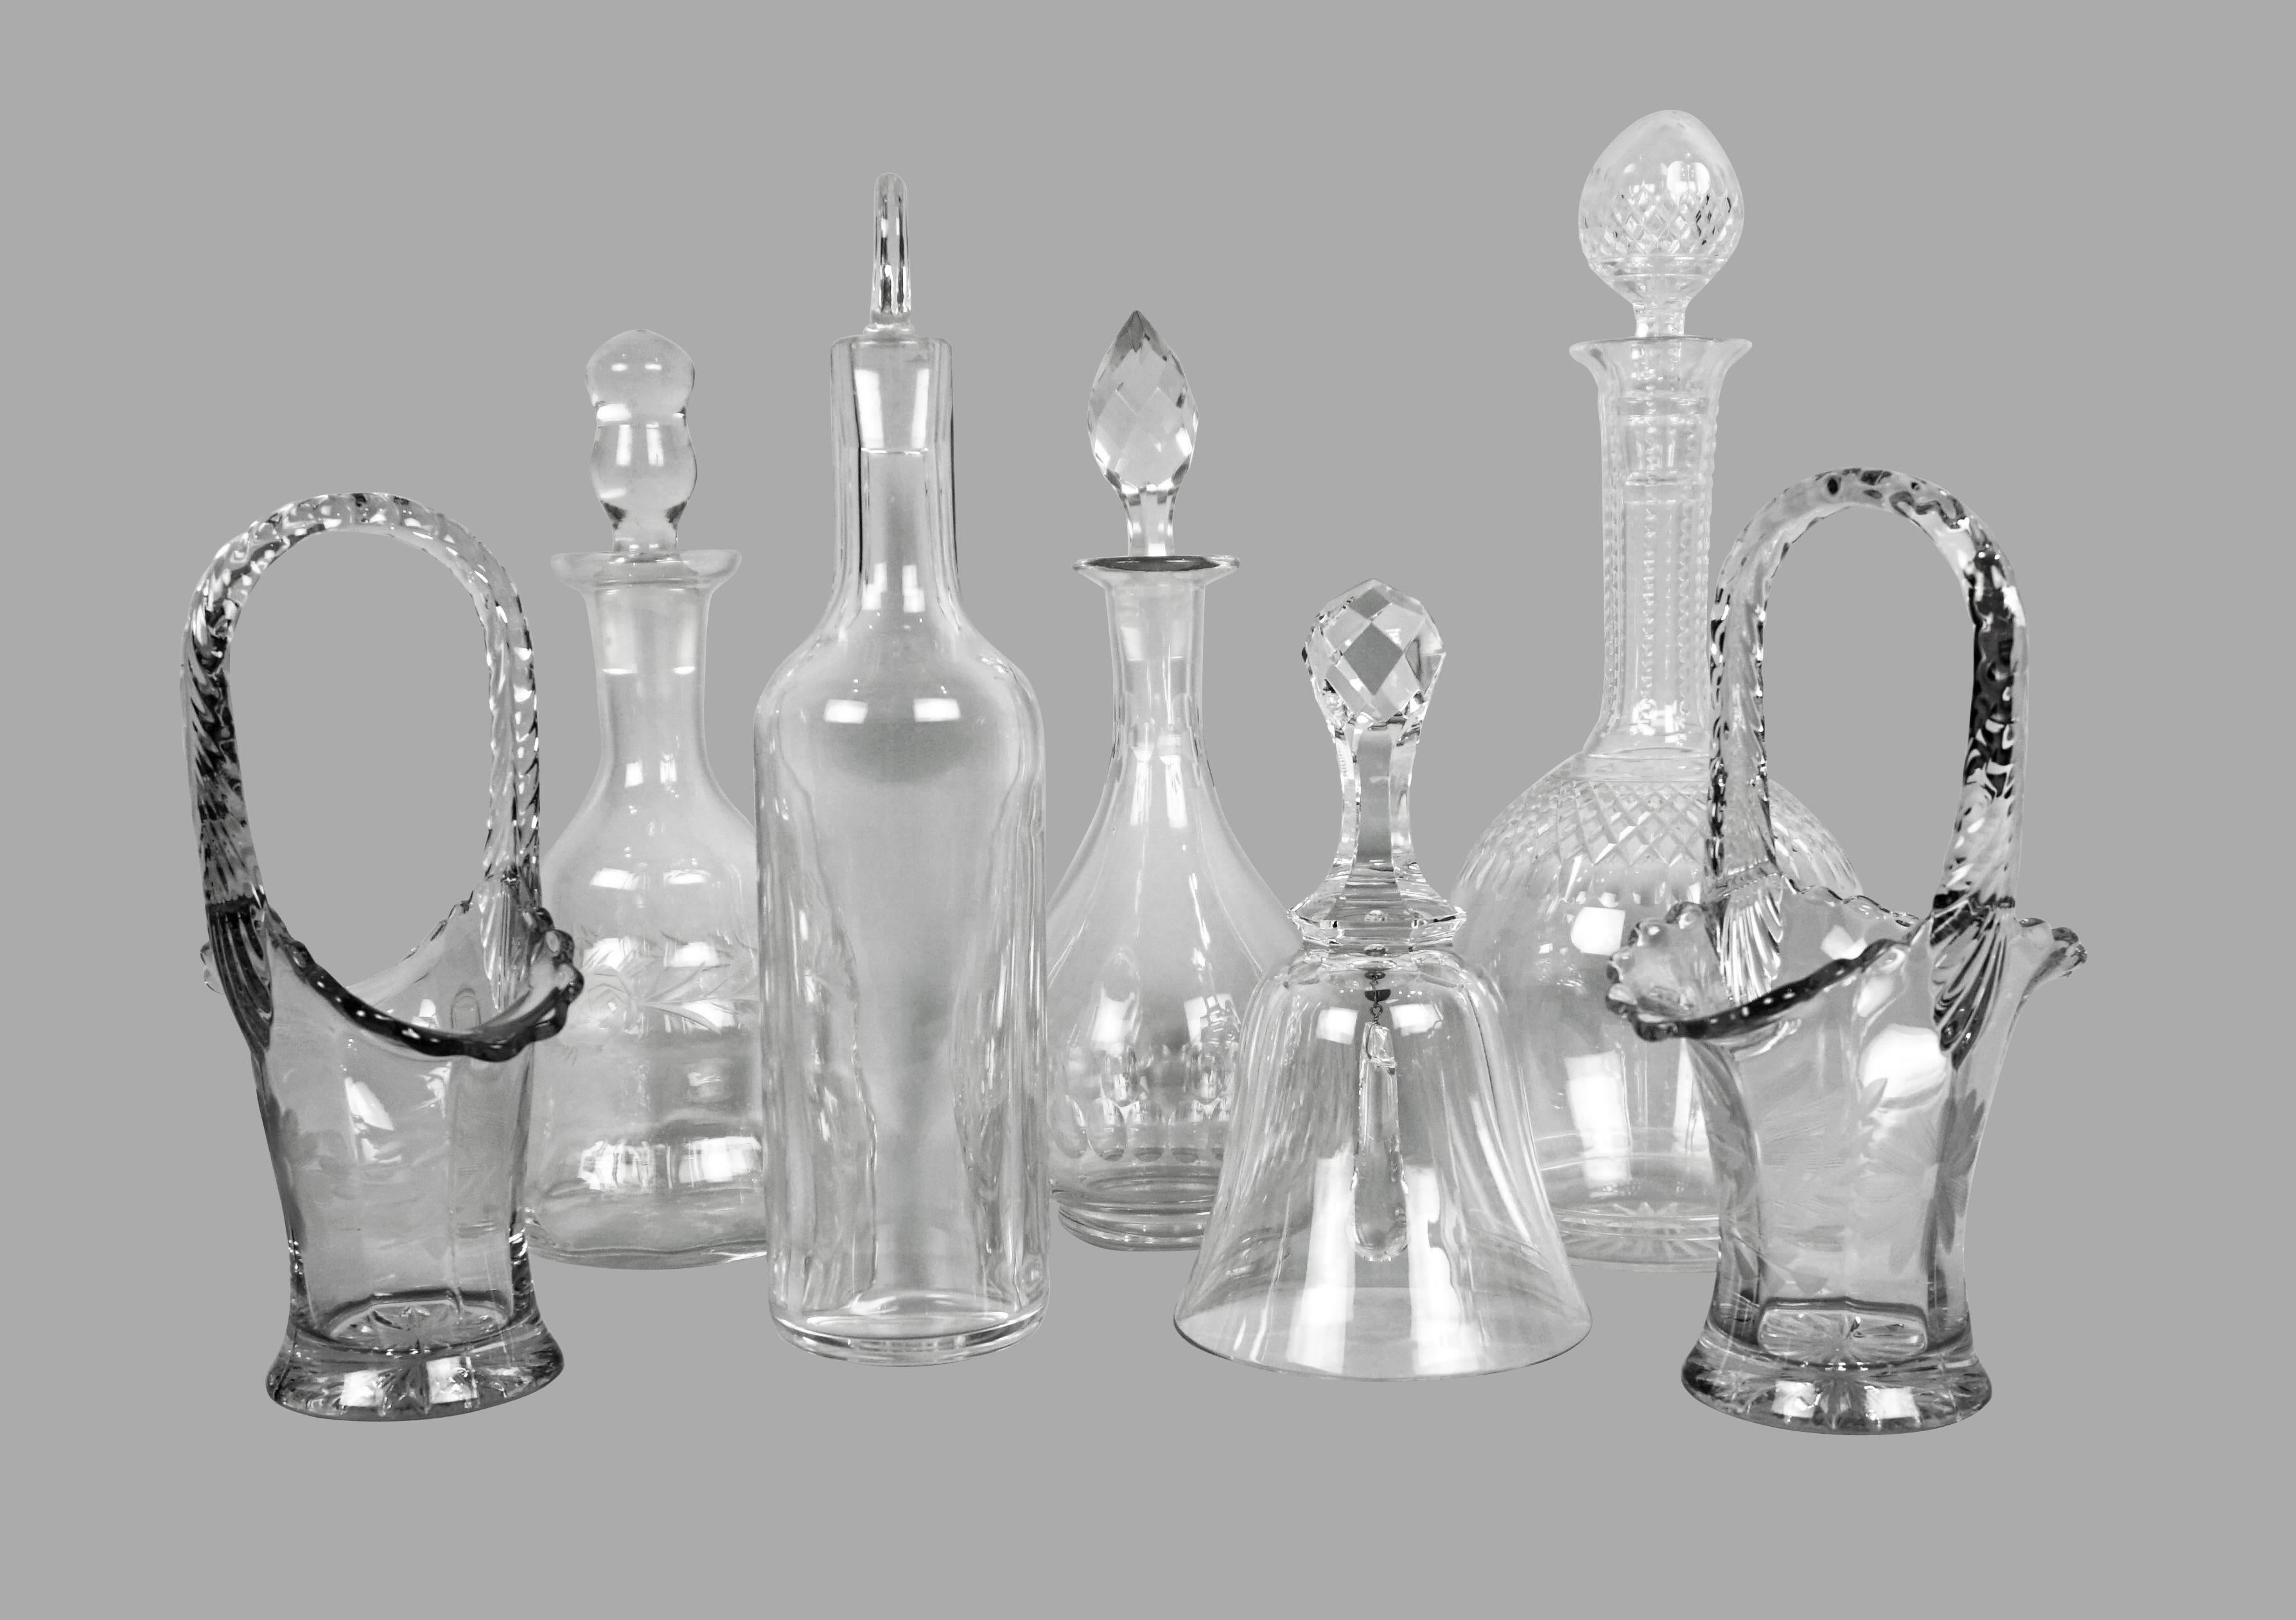 An interesting collection of vintage glass objects consisting of a pair of cut crystal candy dishes, four small decanters with stoppers including one signed Baccarat, and a glass dinner bell. All of the objects date from the first half of the 20th